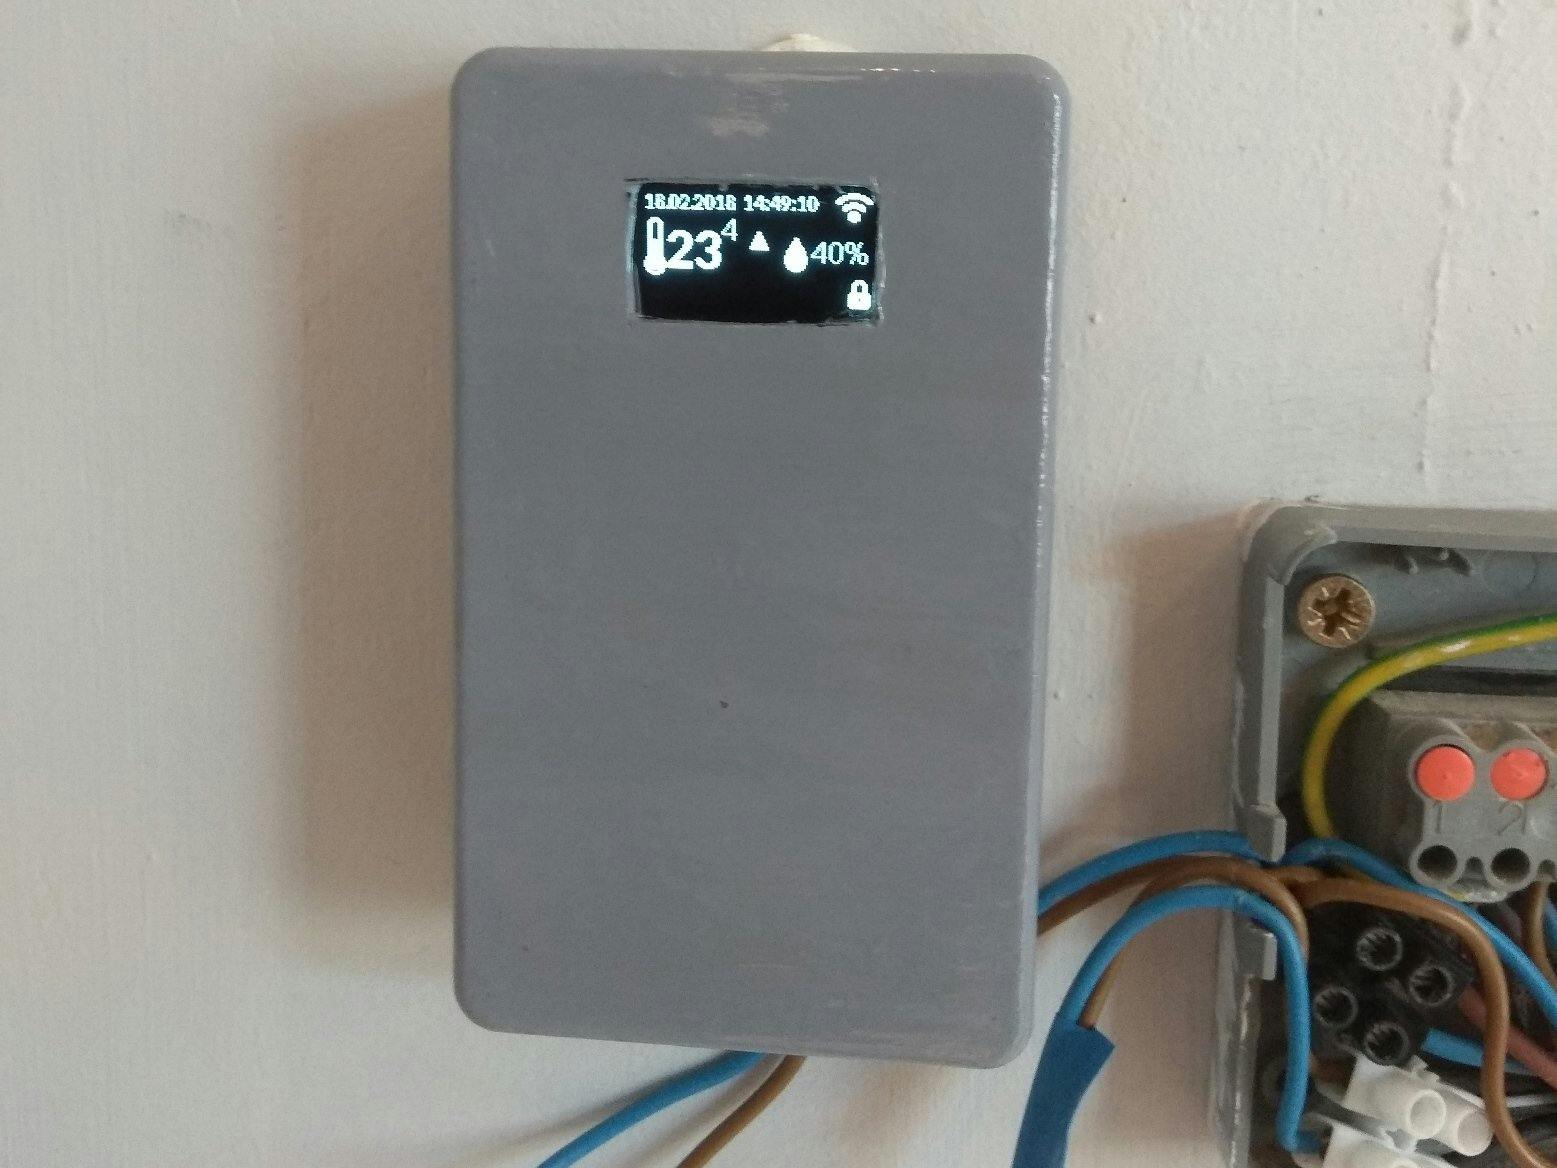 Airlines drop Stratford on Avon Alexa Enabled Thermostat for Junkers Gas Heater - Hackster.io